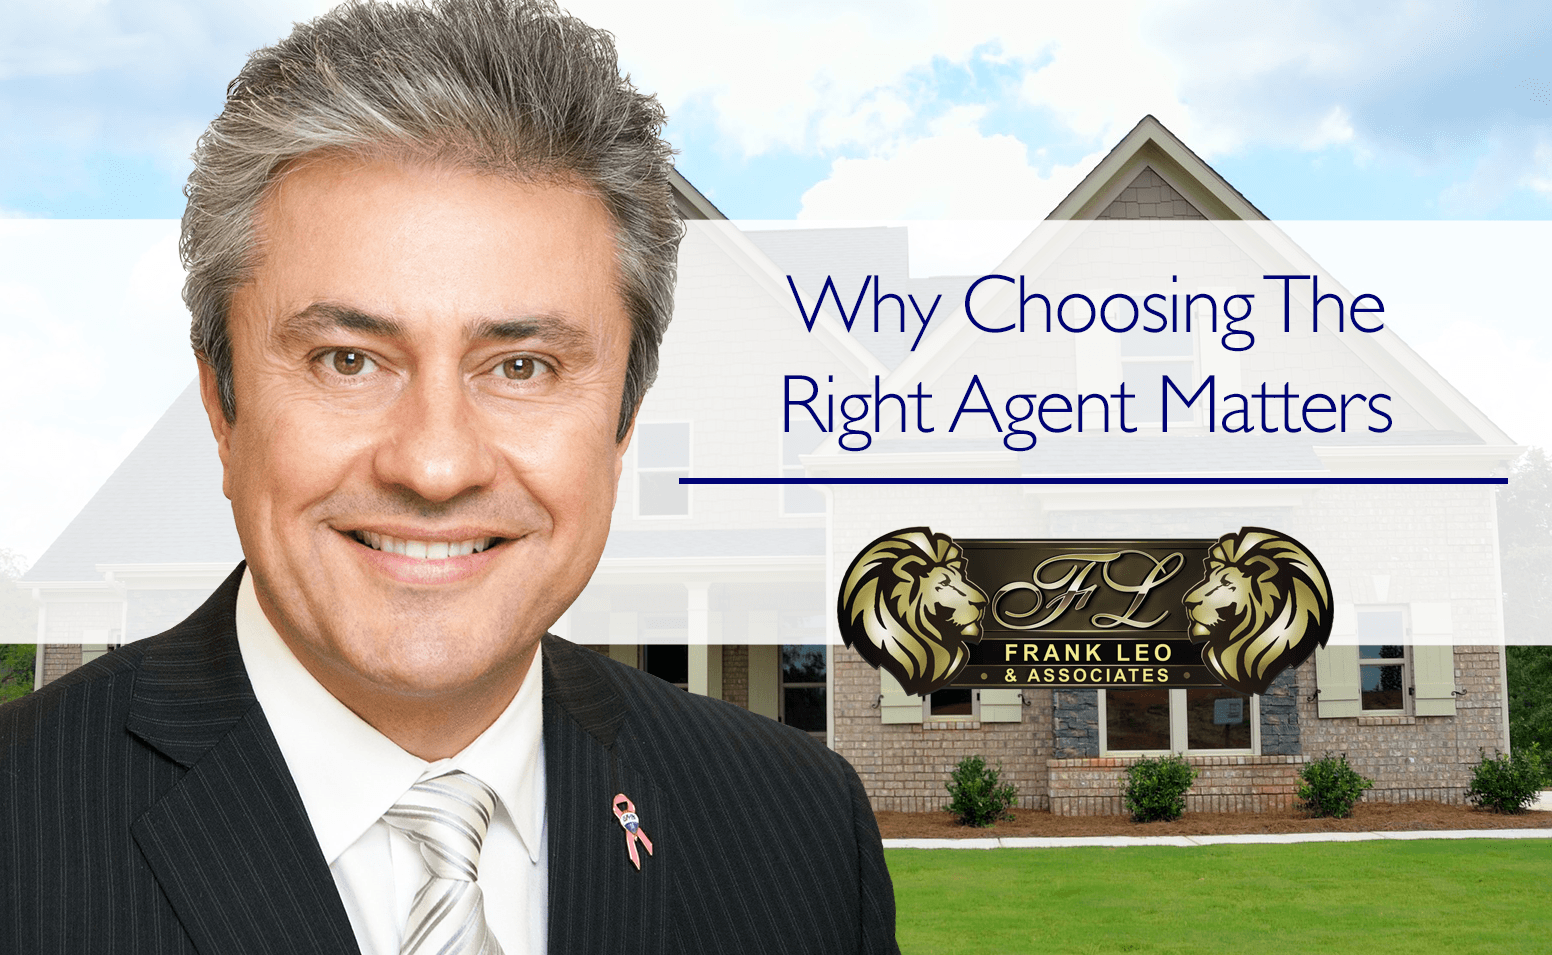 An image of Frank Leo with a house in the background and a text overlay reading "Why Choosing The Right Agent Matters"